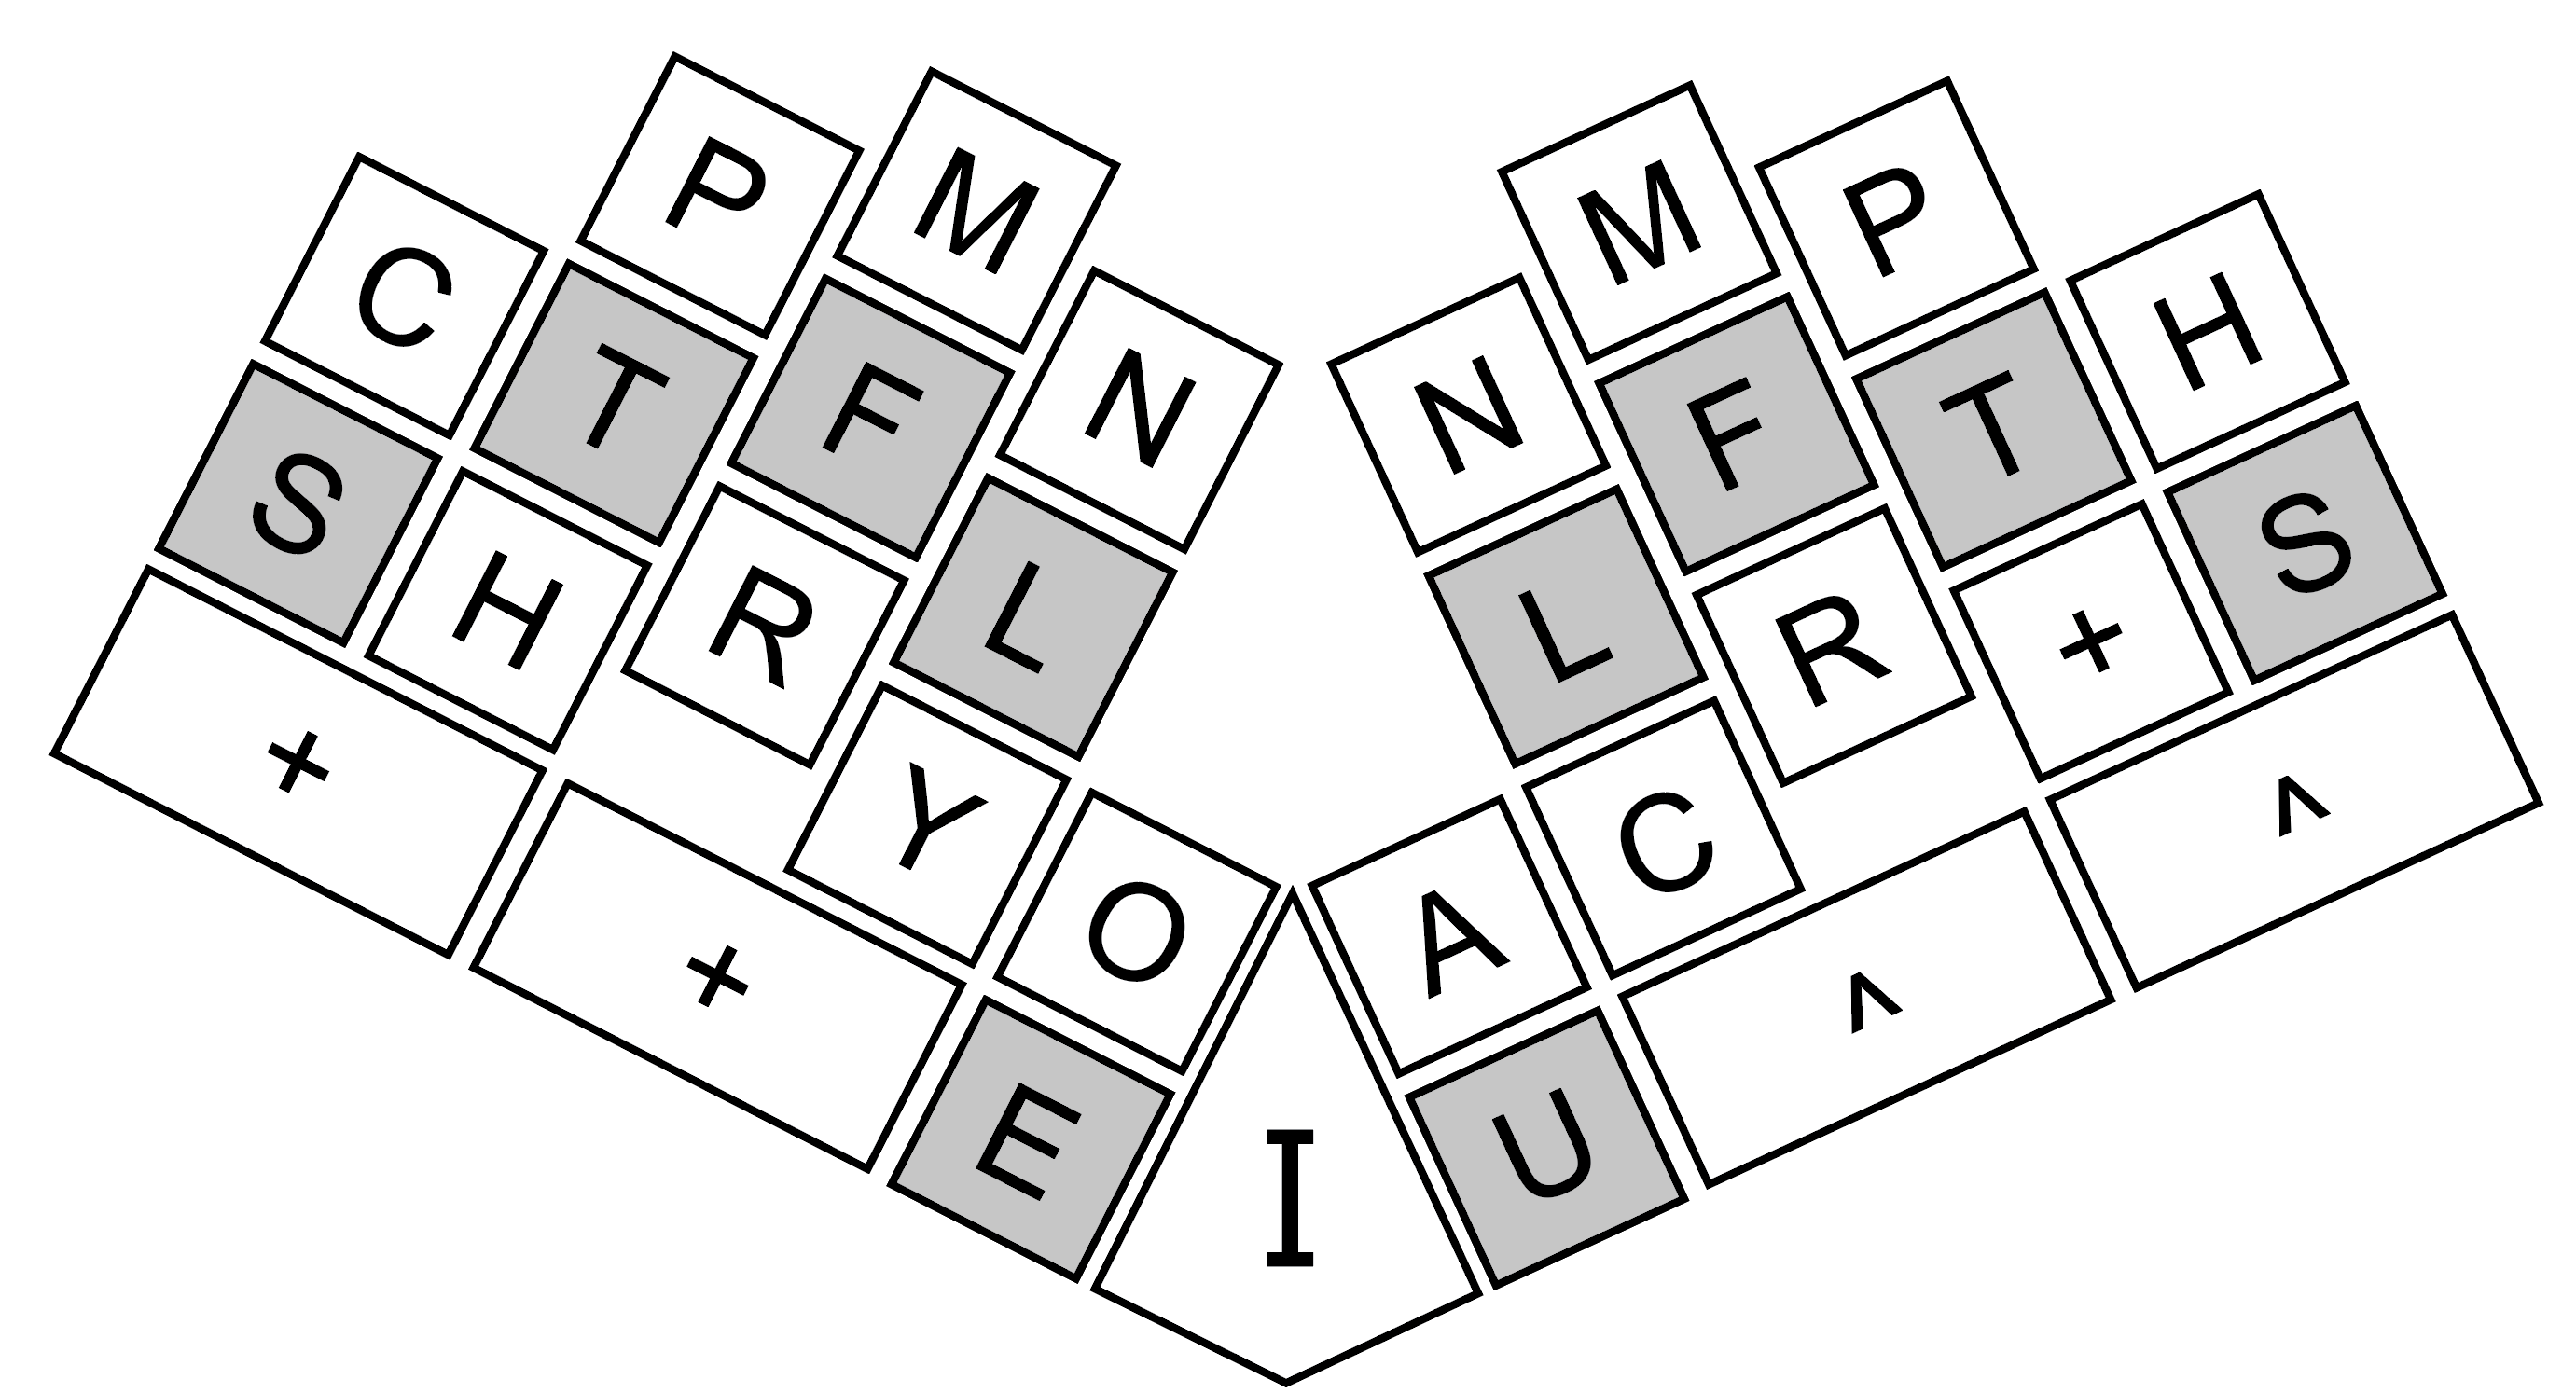 Diagram of the Palantype home row where the home keys are shaded in